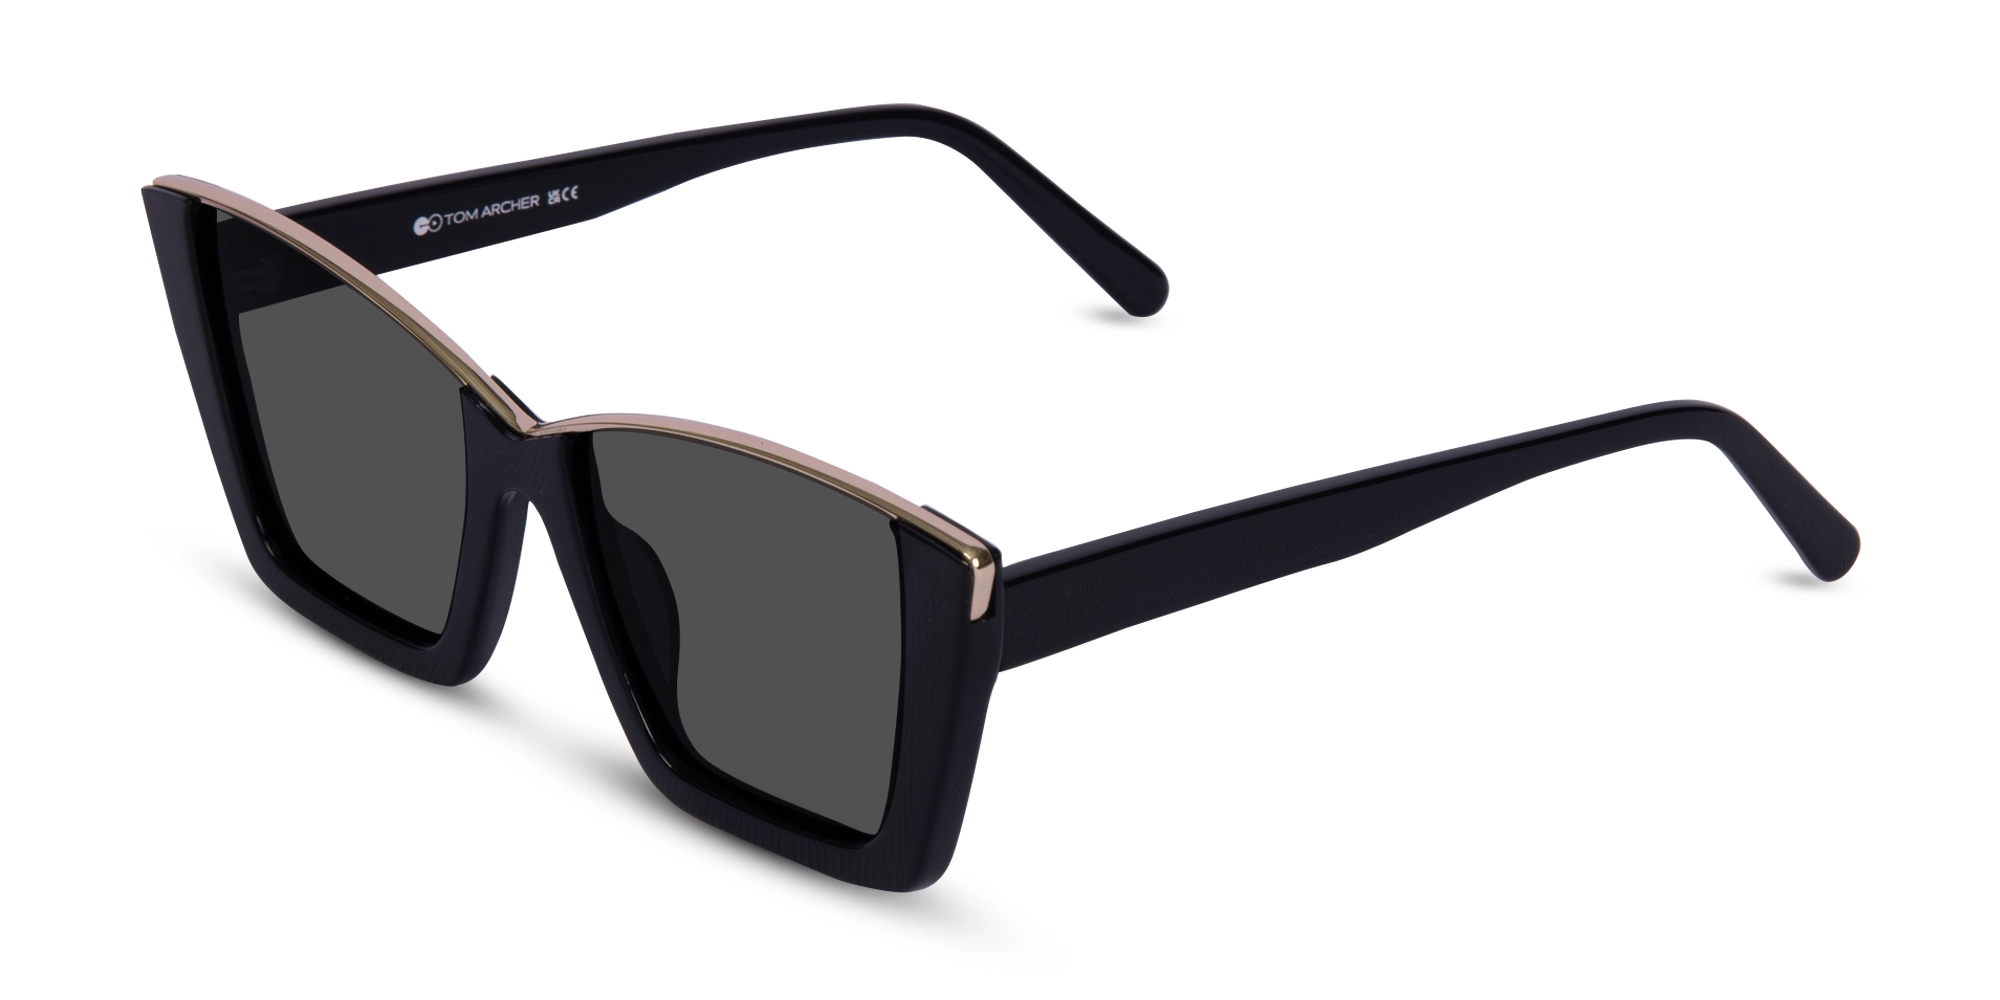 Black Shades For Women